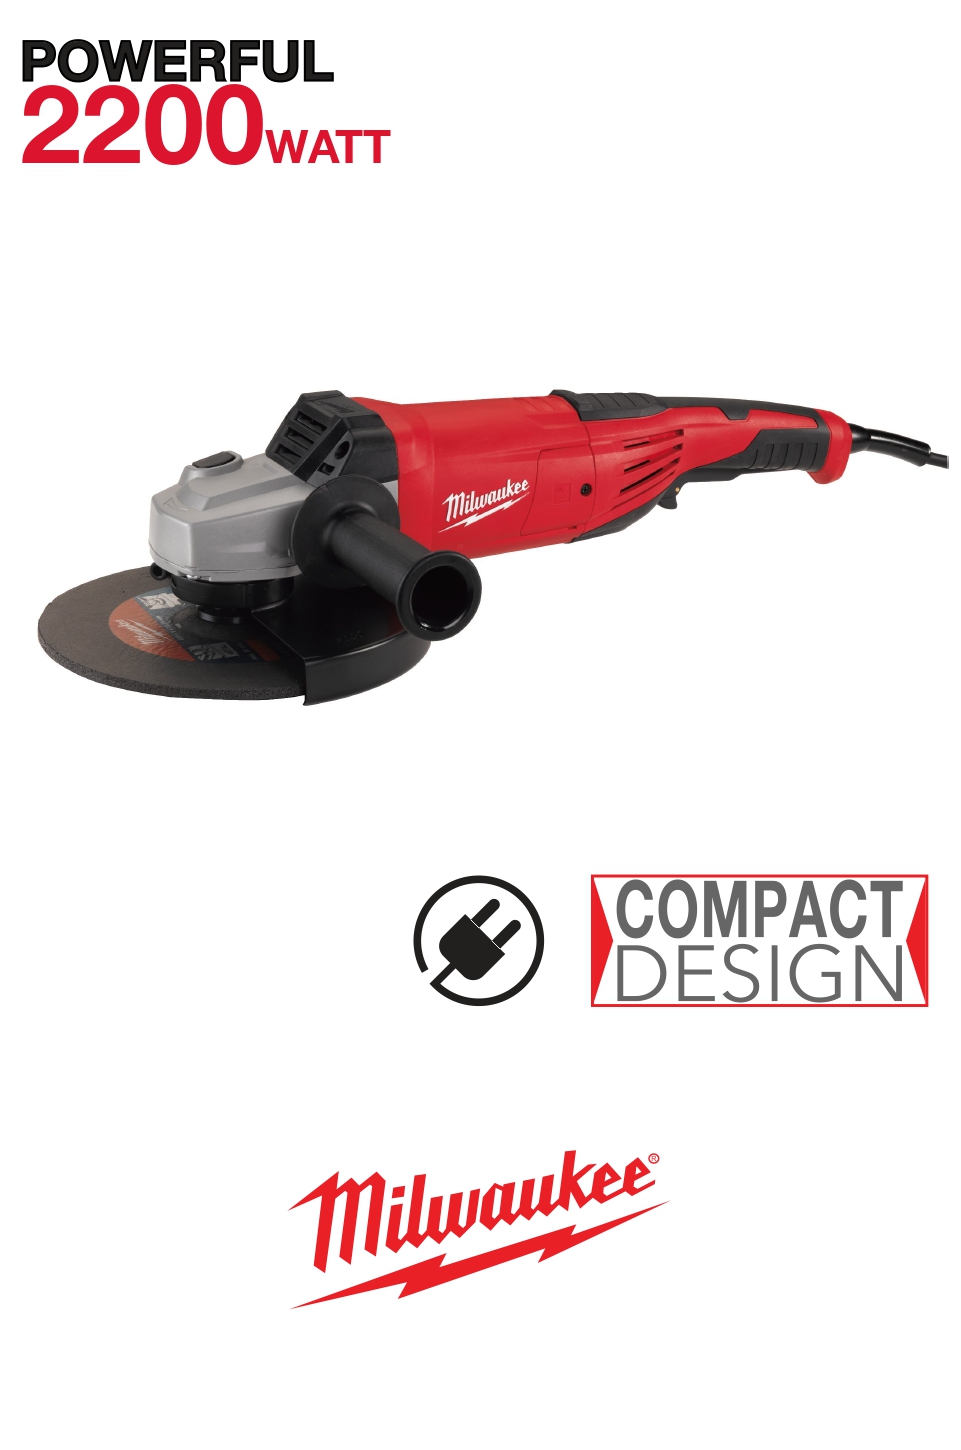 Imexco, ANGLE GRINDER 230MM 2200W  AG 22-230 DMS